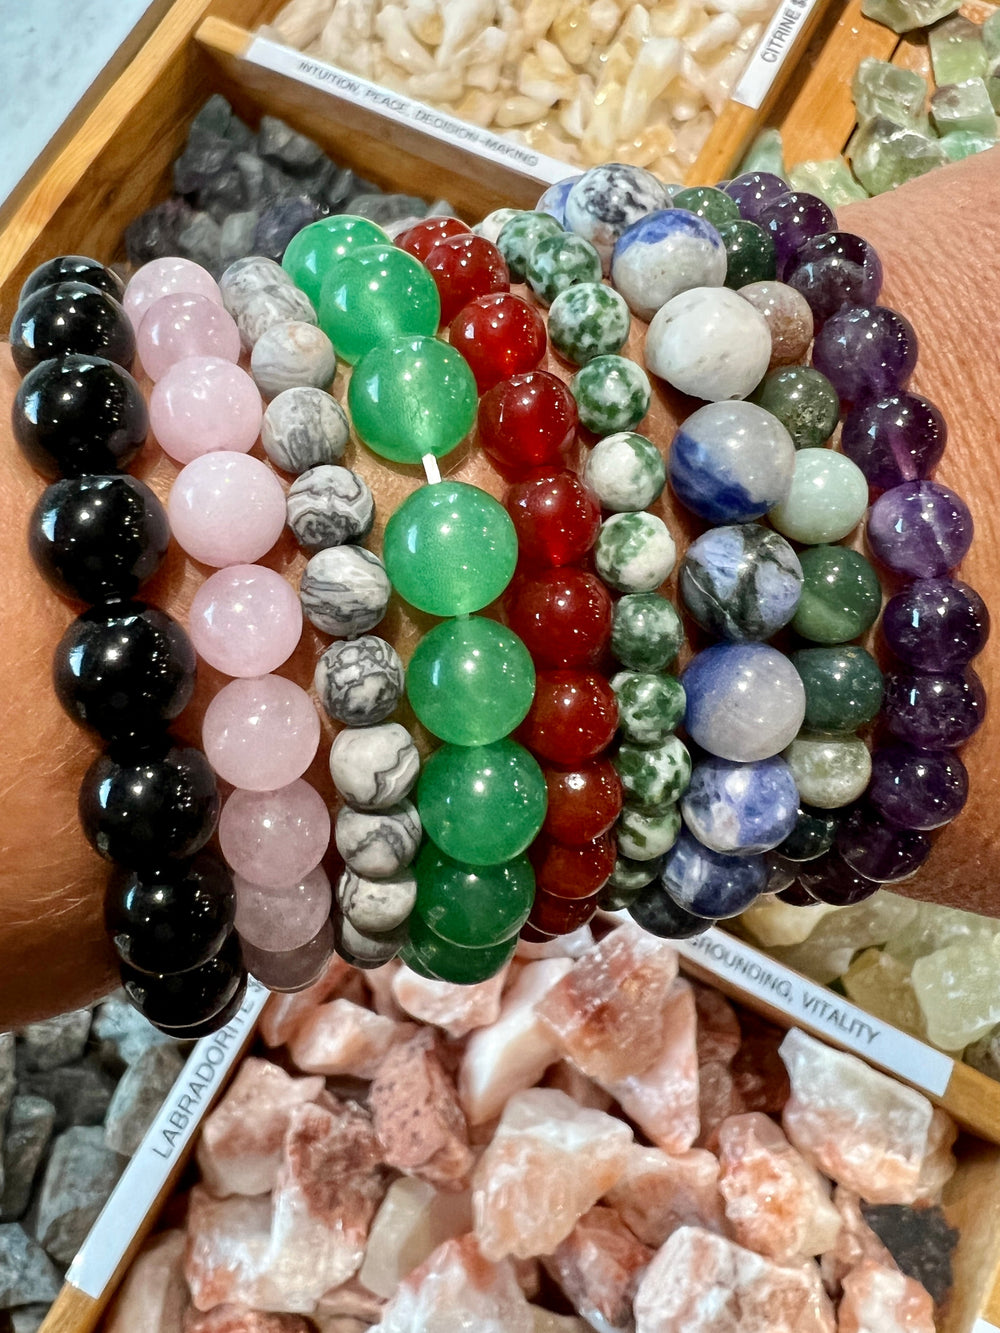 Various 4mm Beaded Stone Bracelets displayed on a wrist, above trays of assorted crystal stones, with informational labels visible.